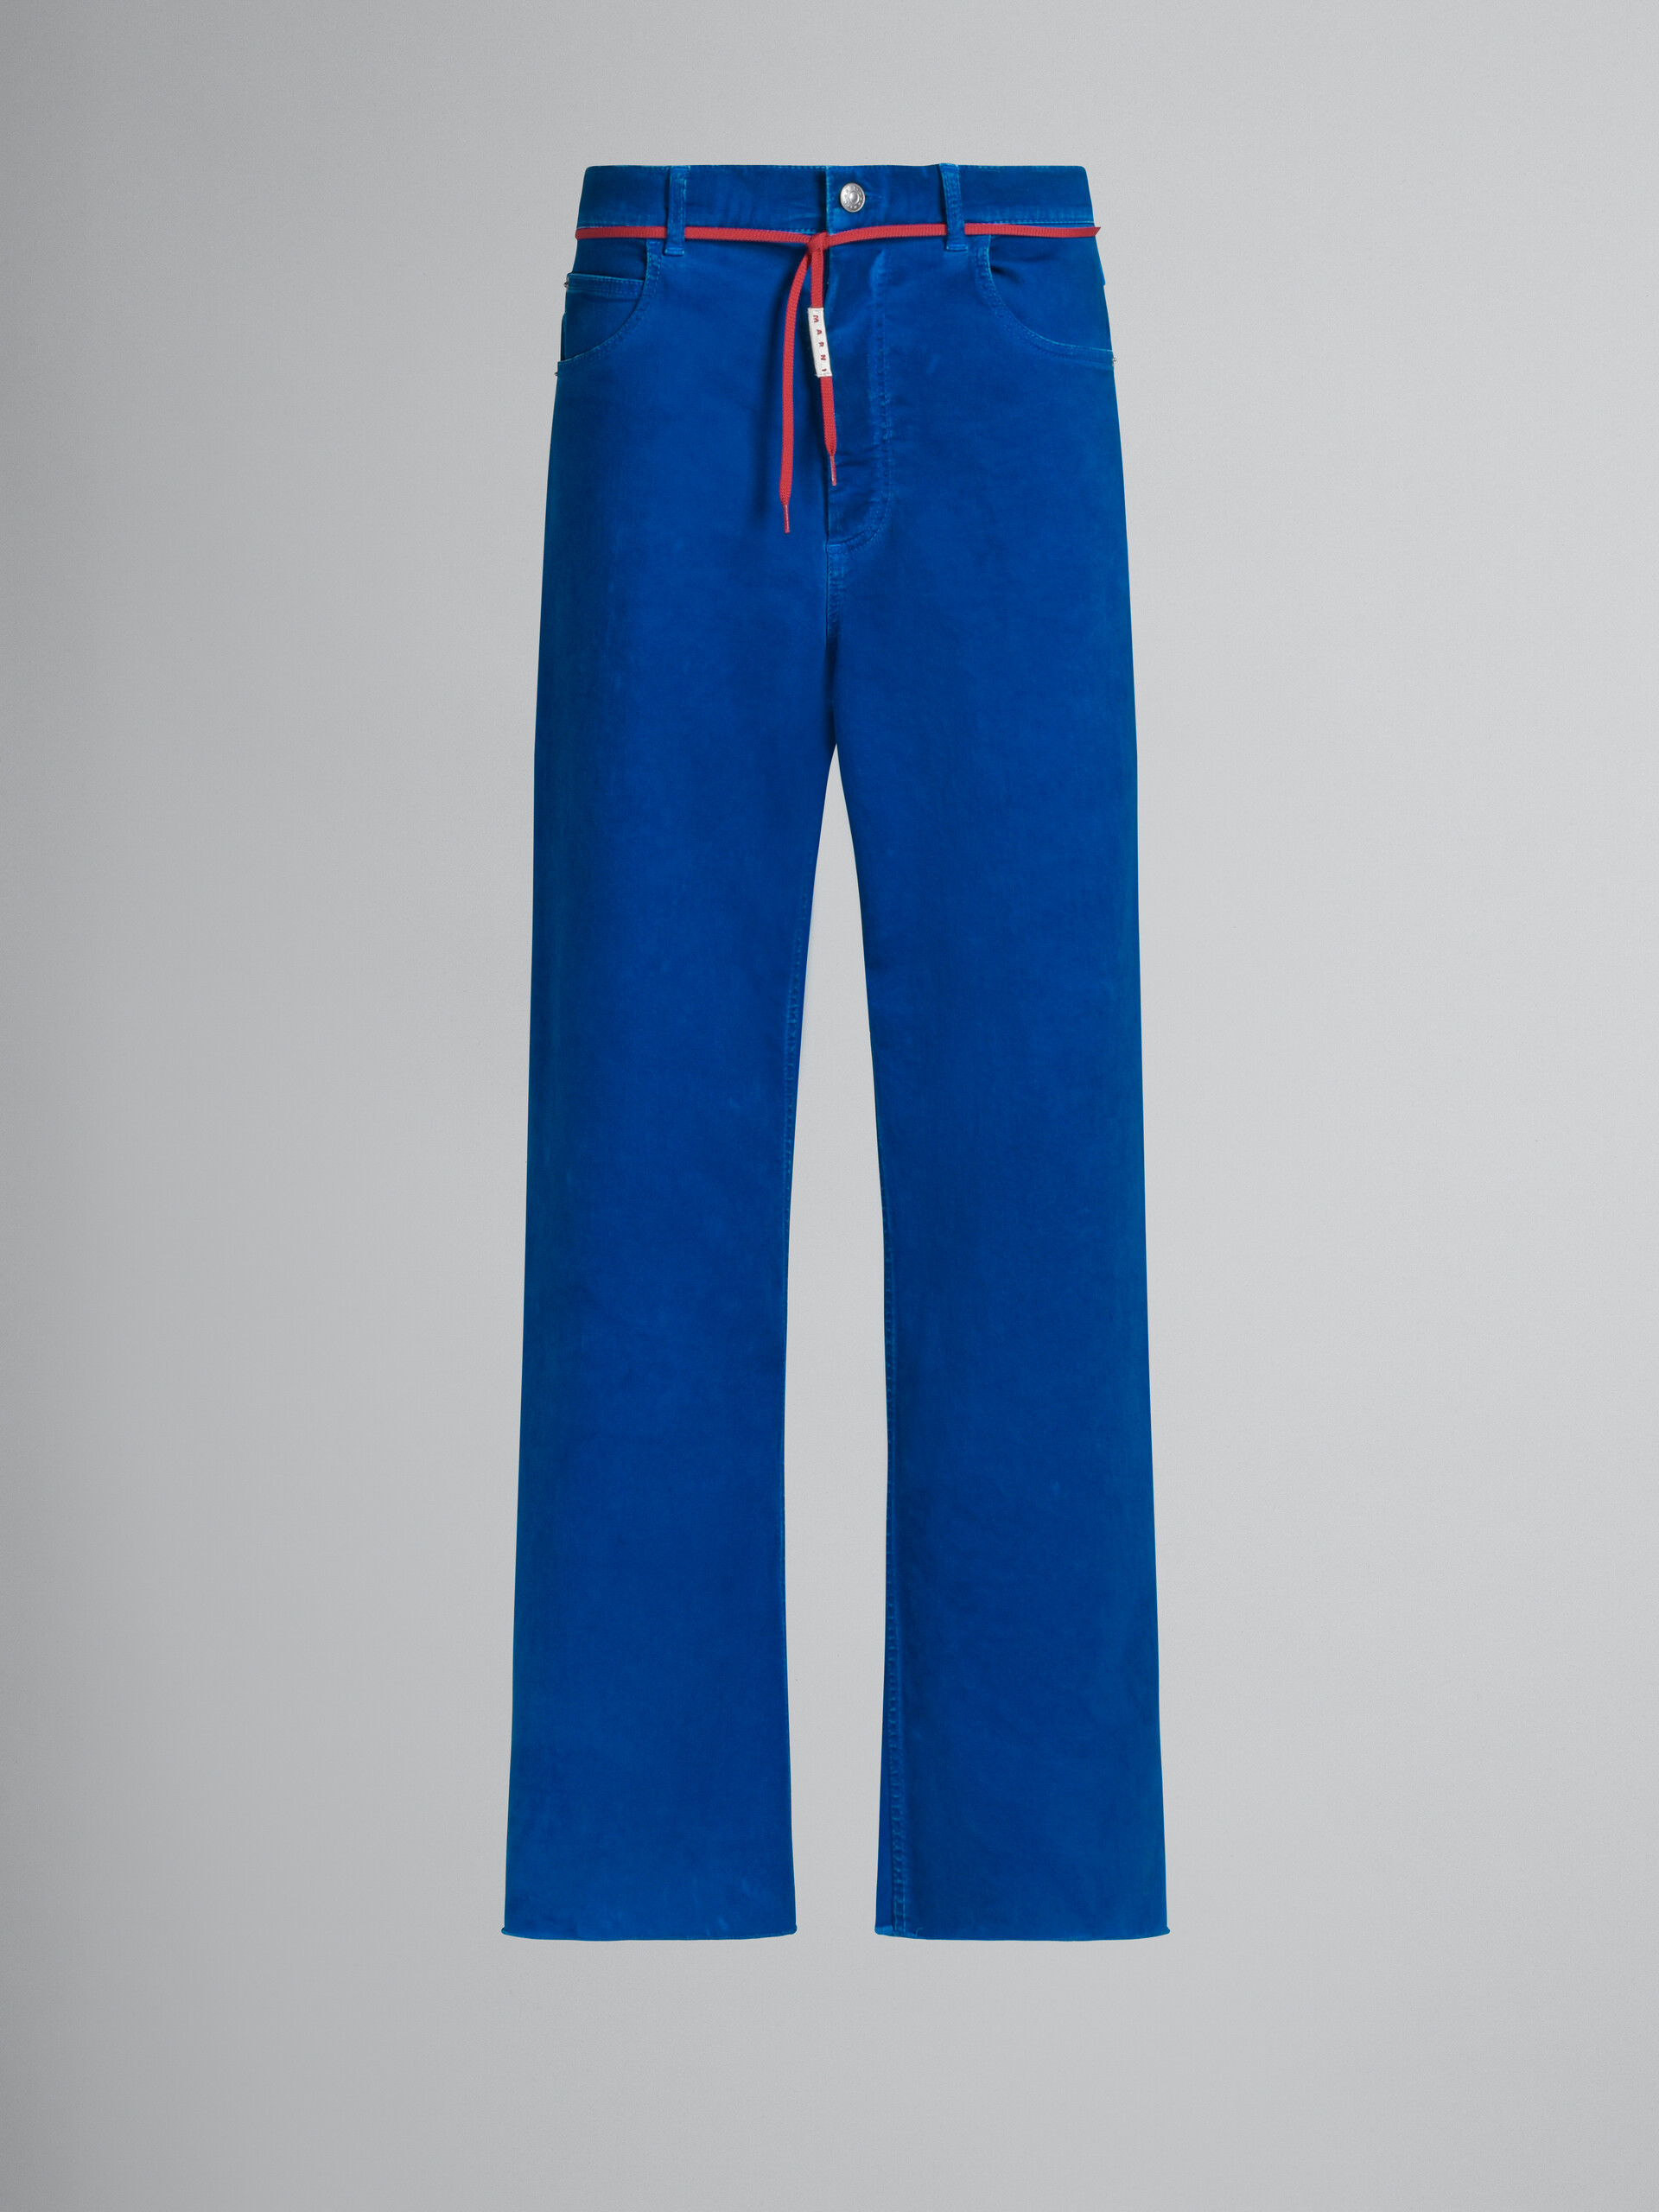 Blue flared 5 pocket trousers in stretch denim - Pants - Image 1